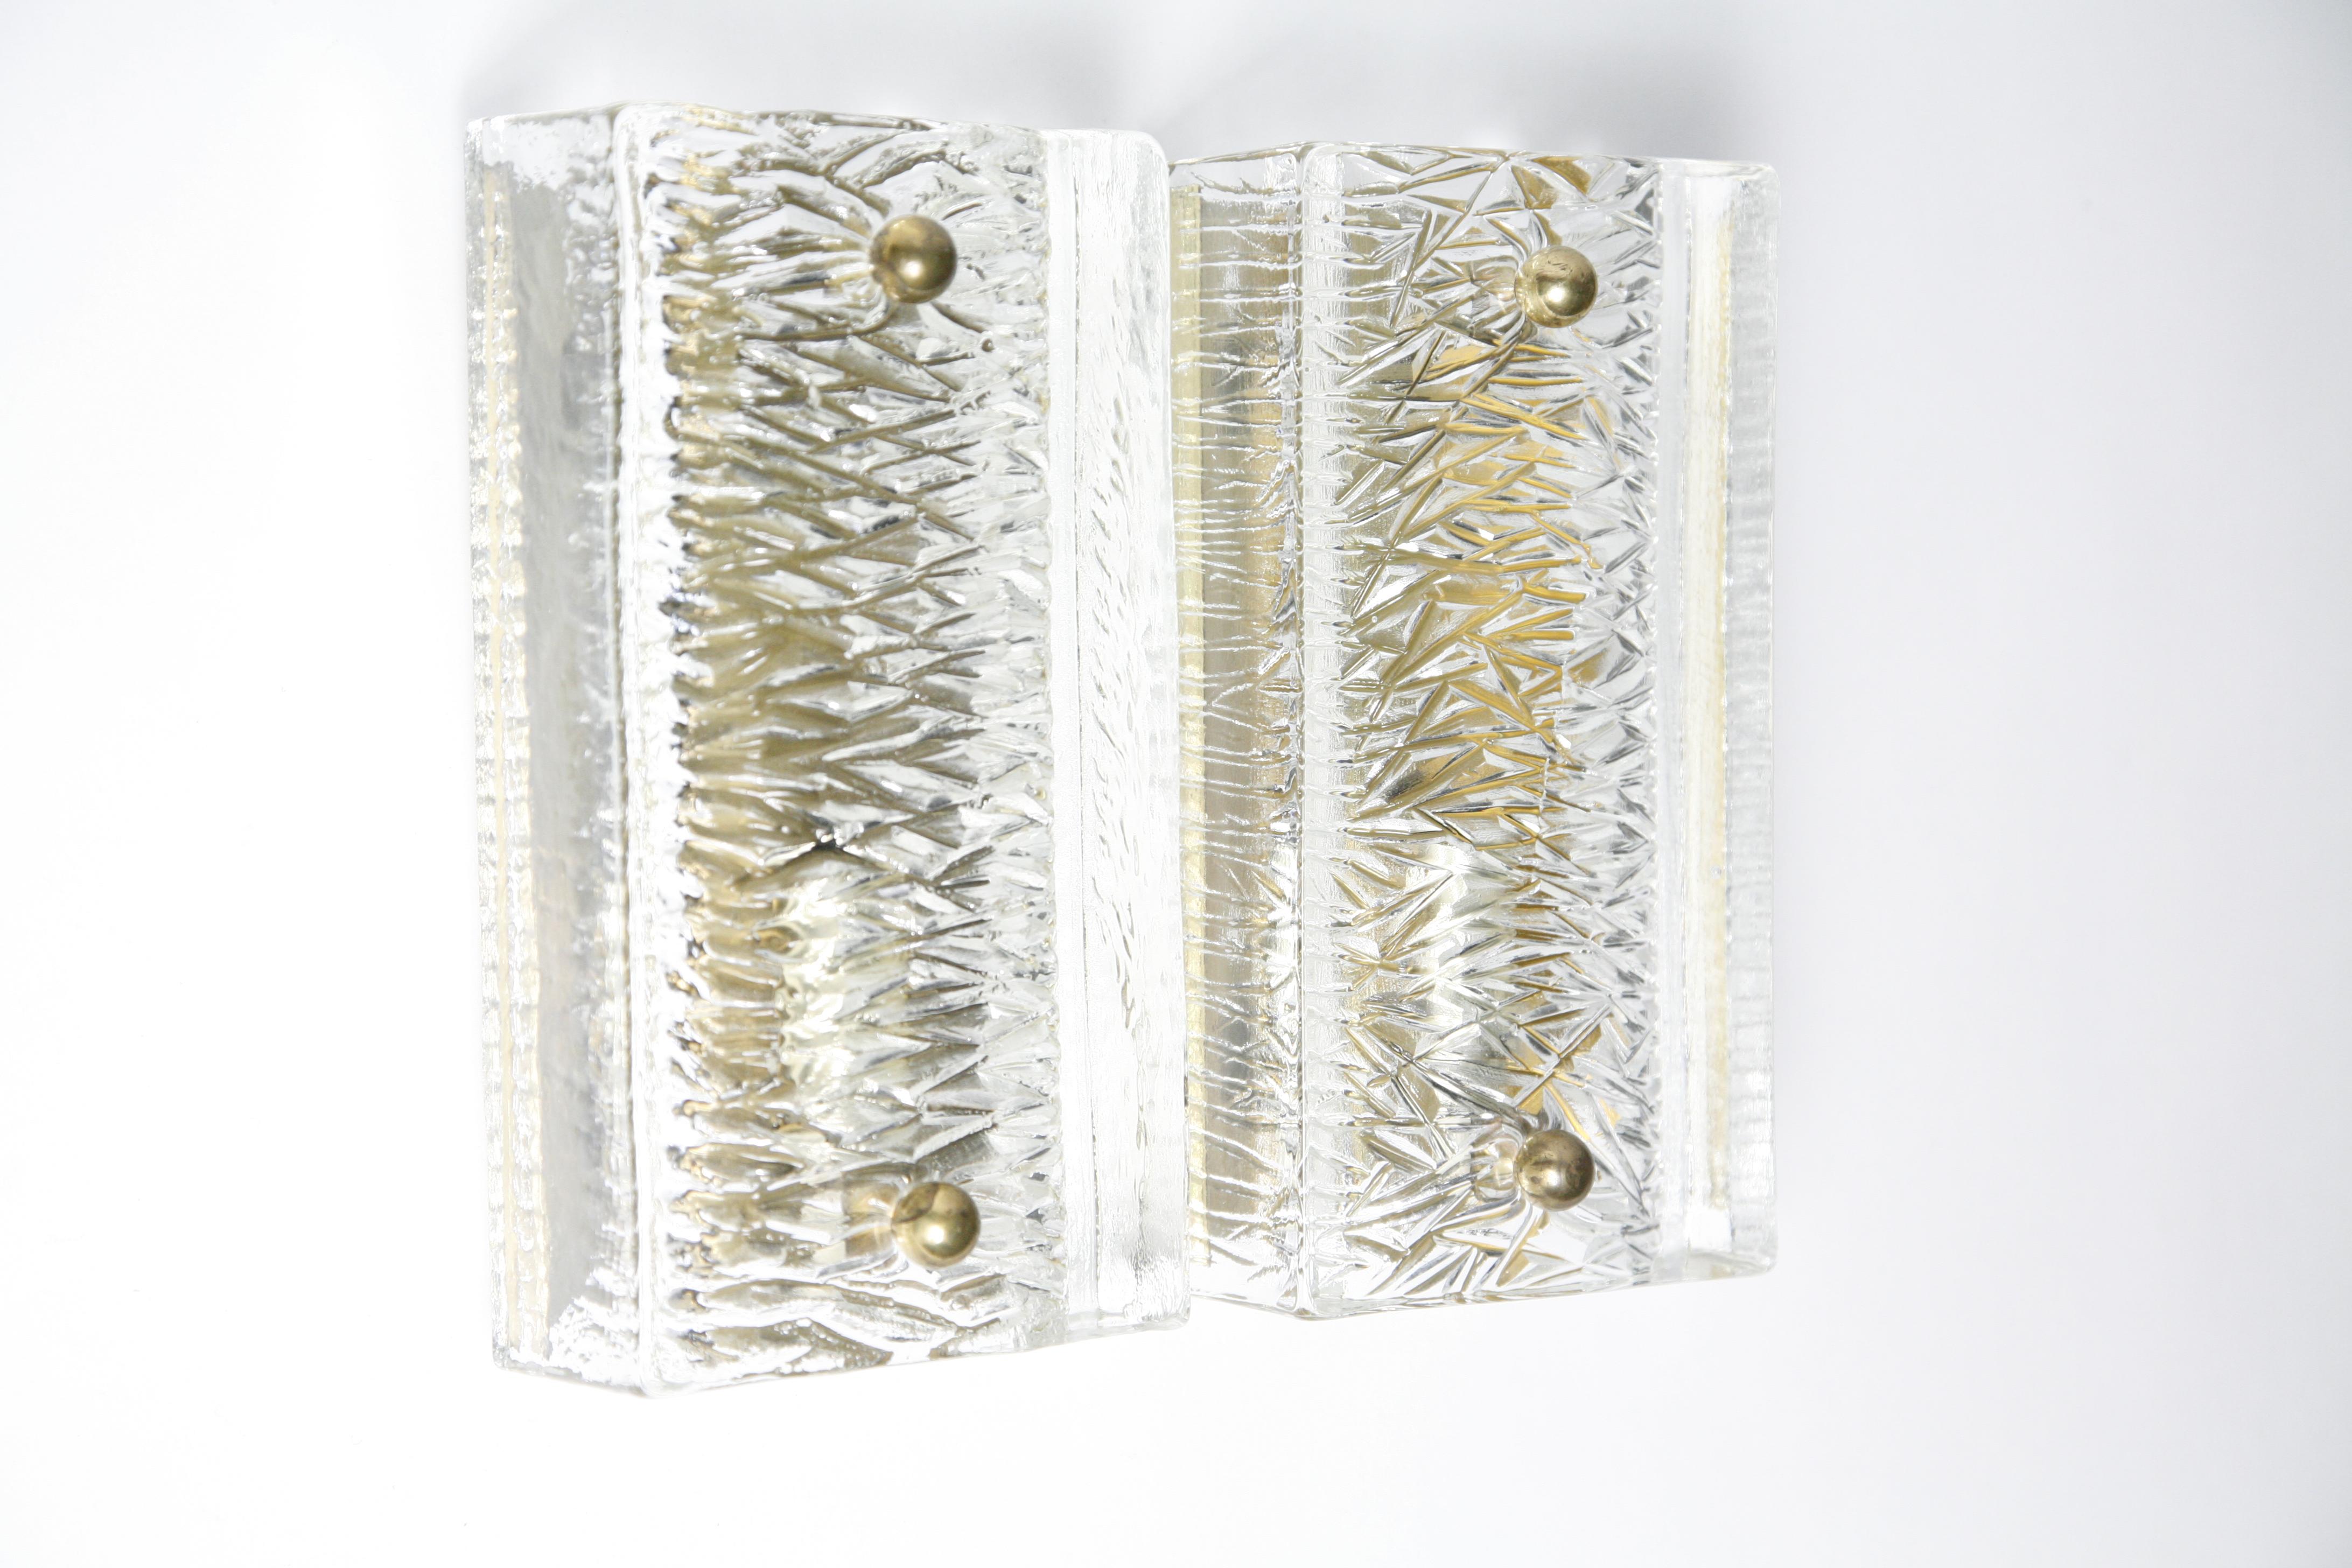 Cast Pair of Orrefors Sconces Brass and Glass Shades by Orrefors Sweden, 1970 For Sale